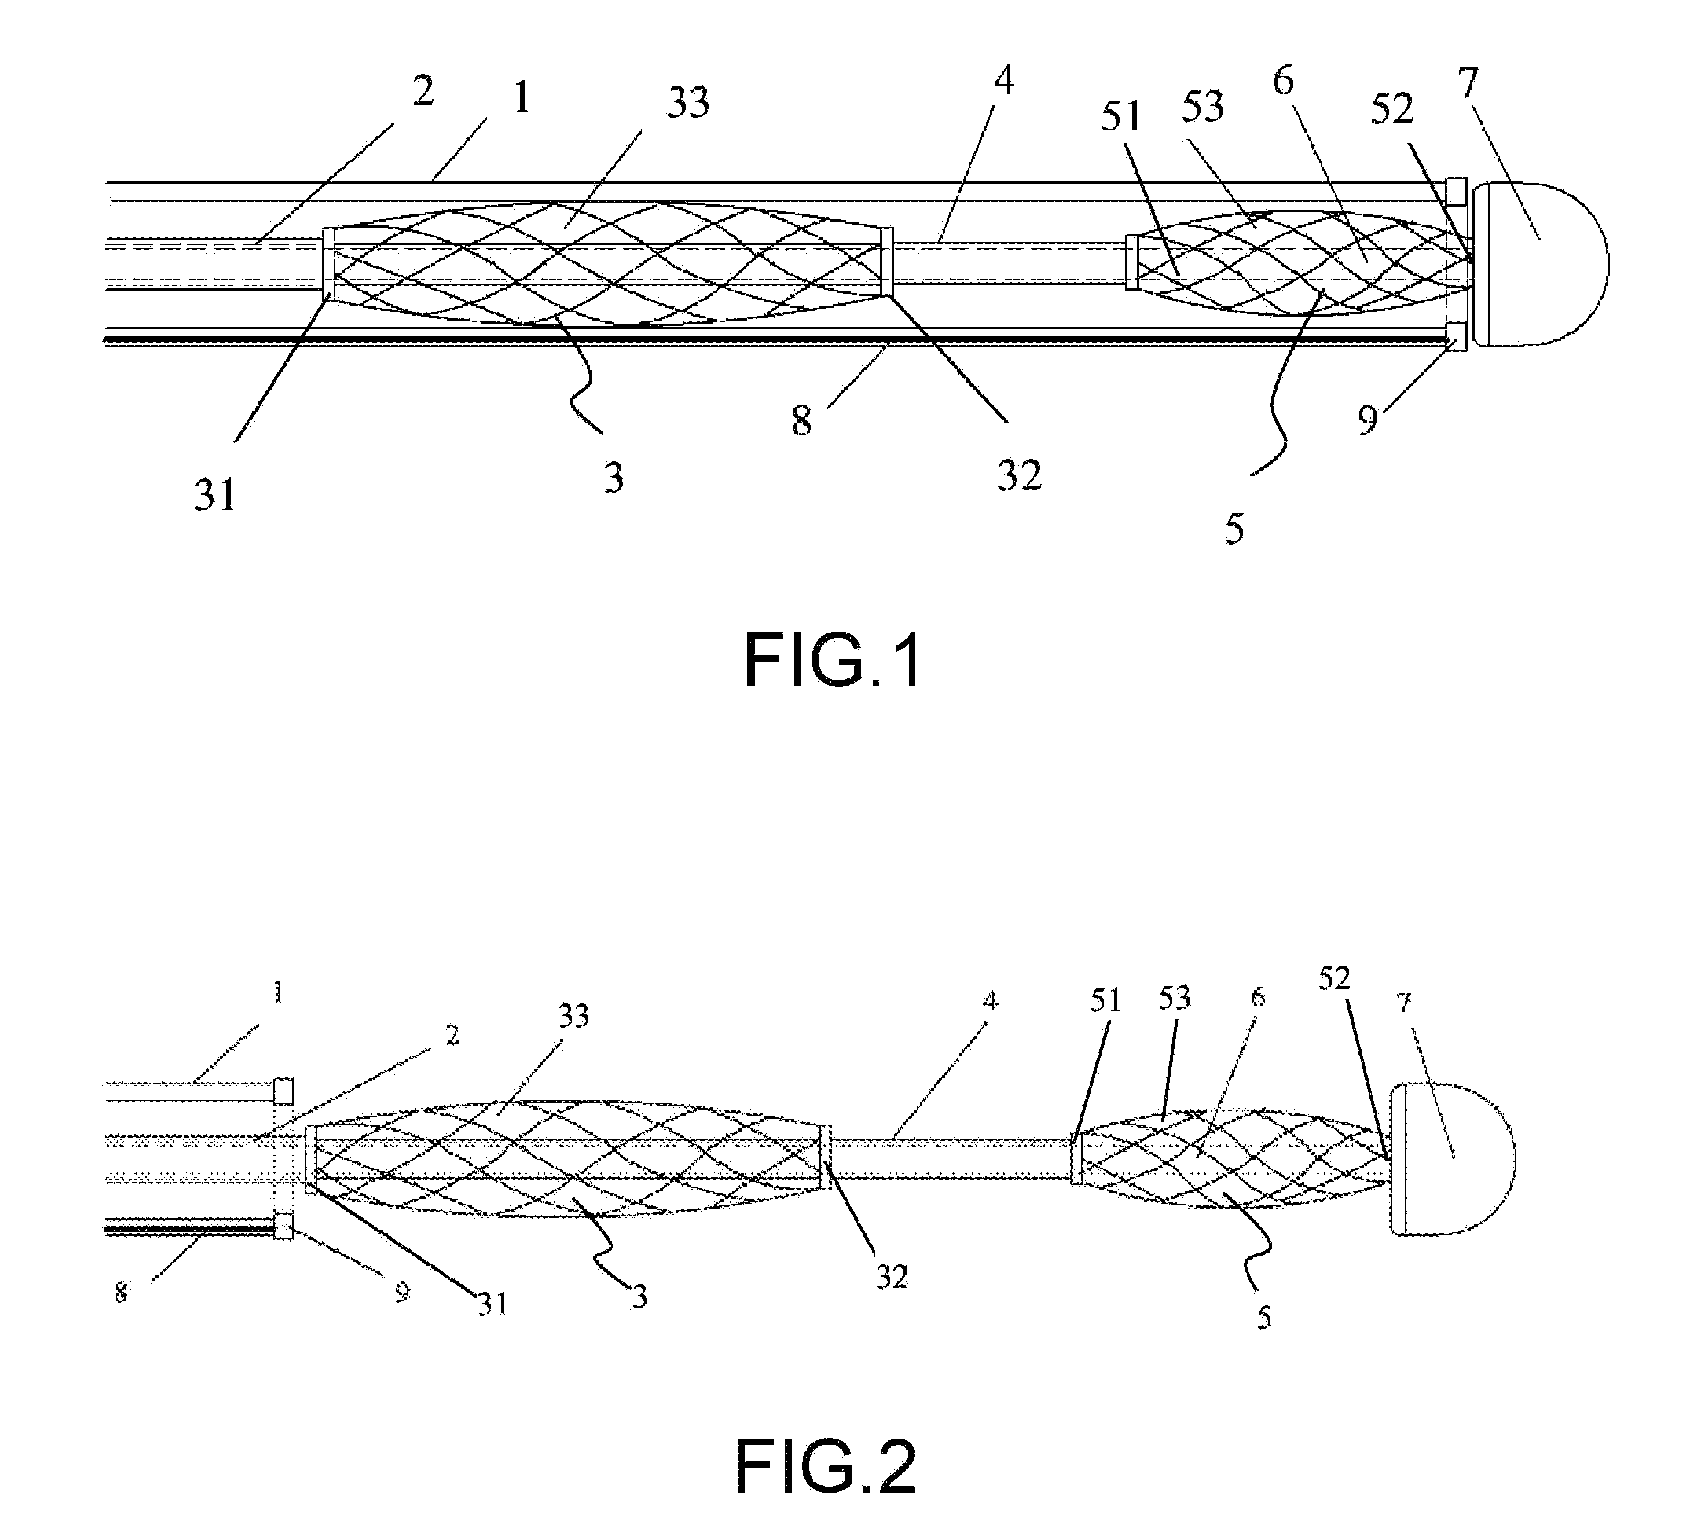 Electrophysiology ablation device